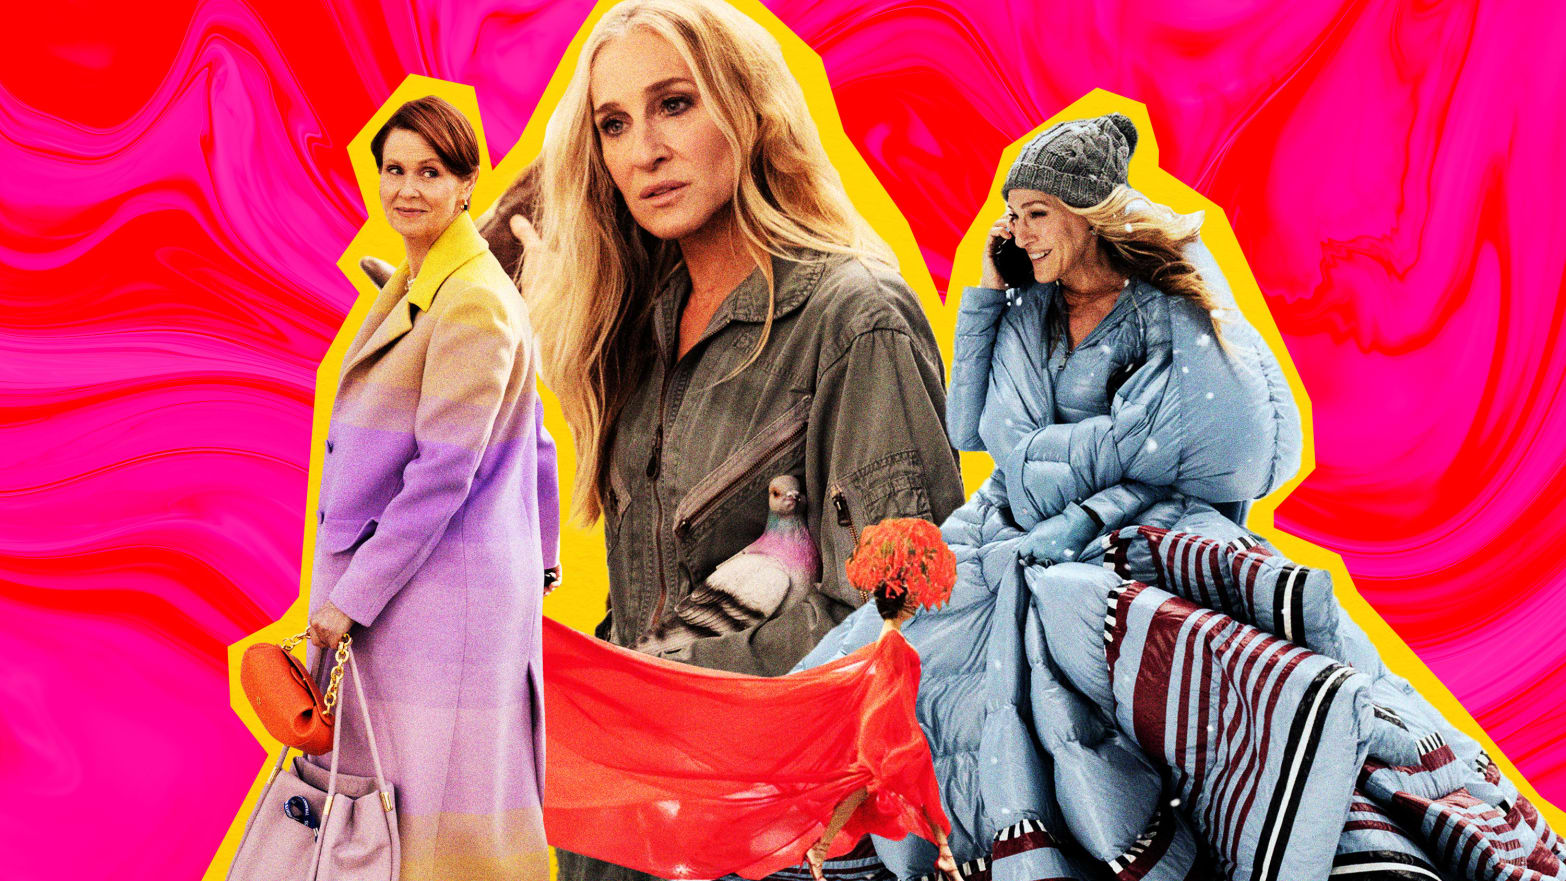 Carrie Bradshaw's Best Handbags Never Go Out of Style